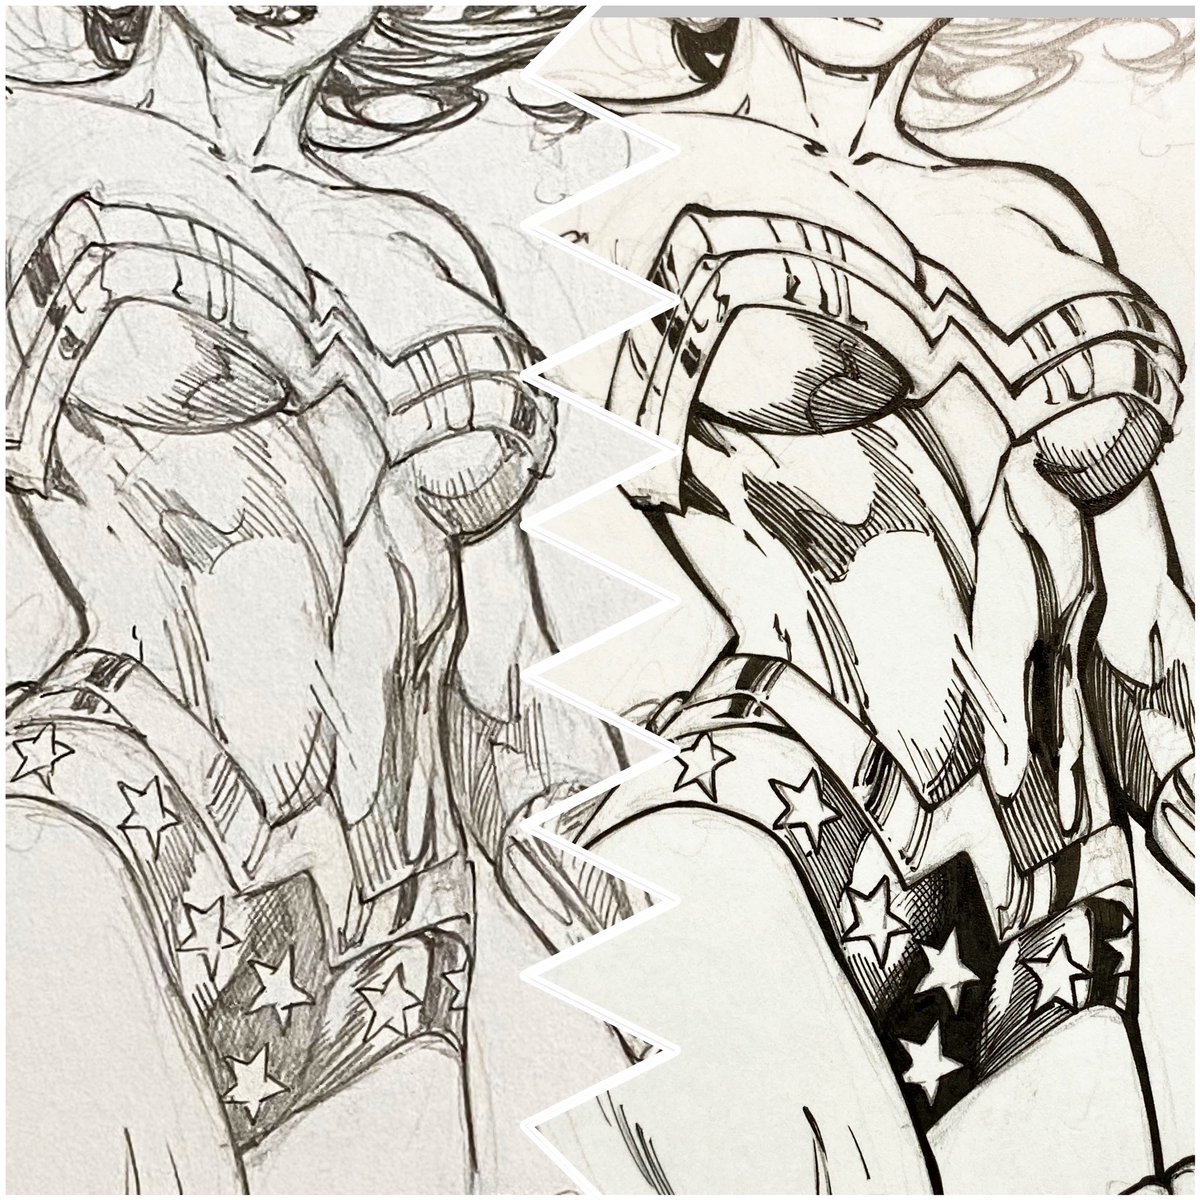 #Torso #Tuesday 
Is it a thing? 
Oh, please let it be a thing. 🙈 
Bats is working that new suit, isn’t he?! You go, Bruths!!!
#EdBenes ✏️ #SandraHope ✒️
#beforeandafter #WW #inks #comics #WonderWoman #art #oldschool #inkmonkey #Hope #inking #lowtech #skills #commissions #WIP